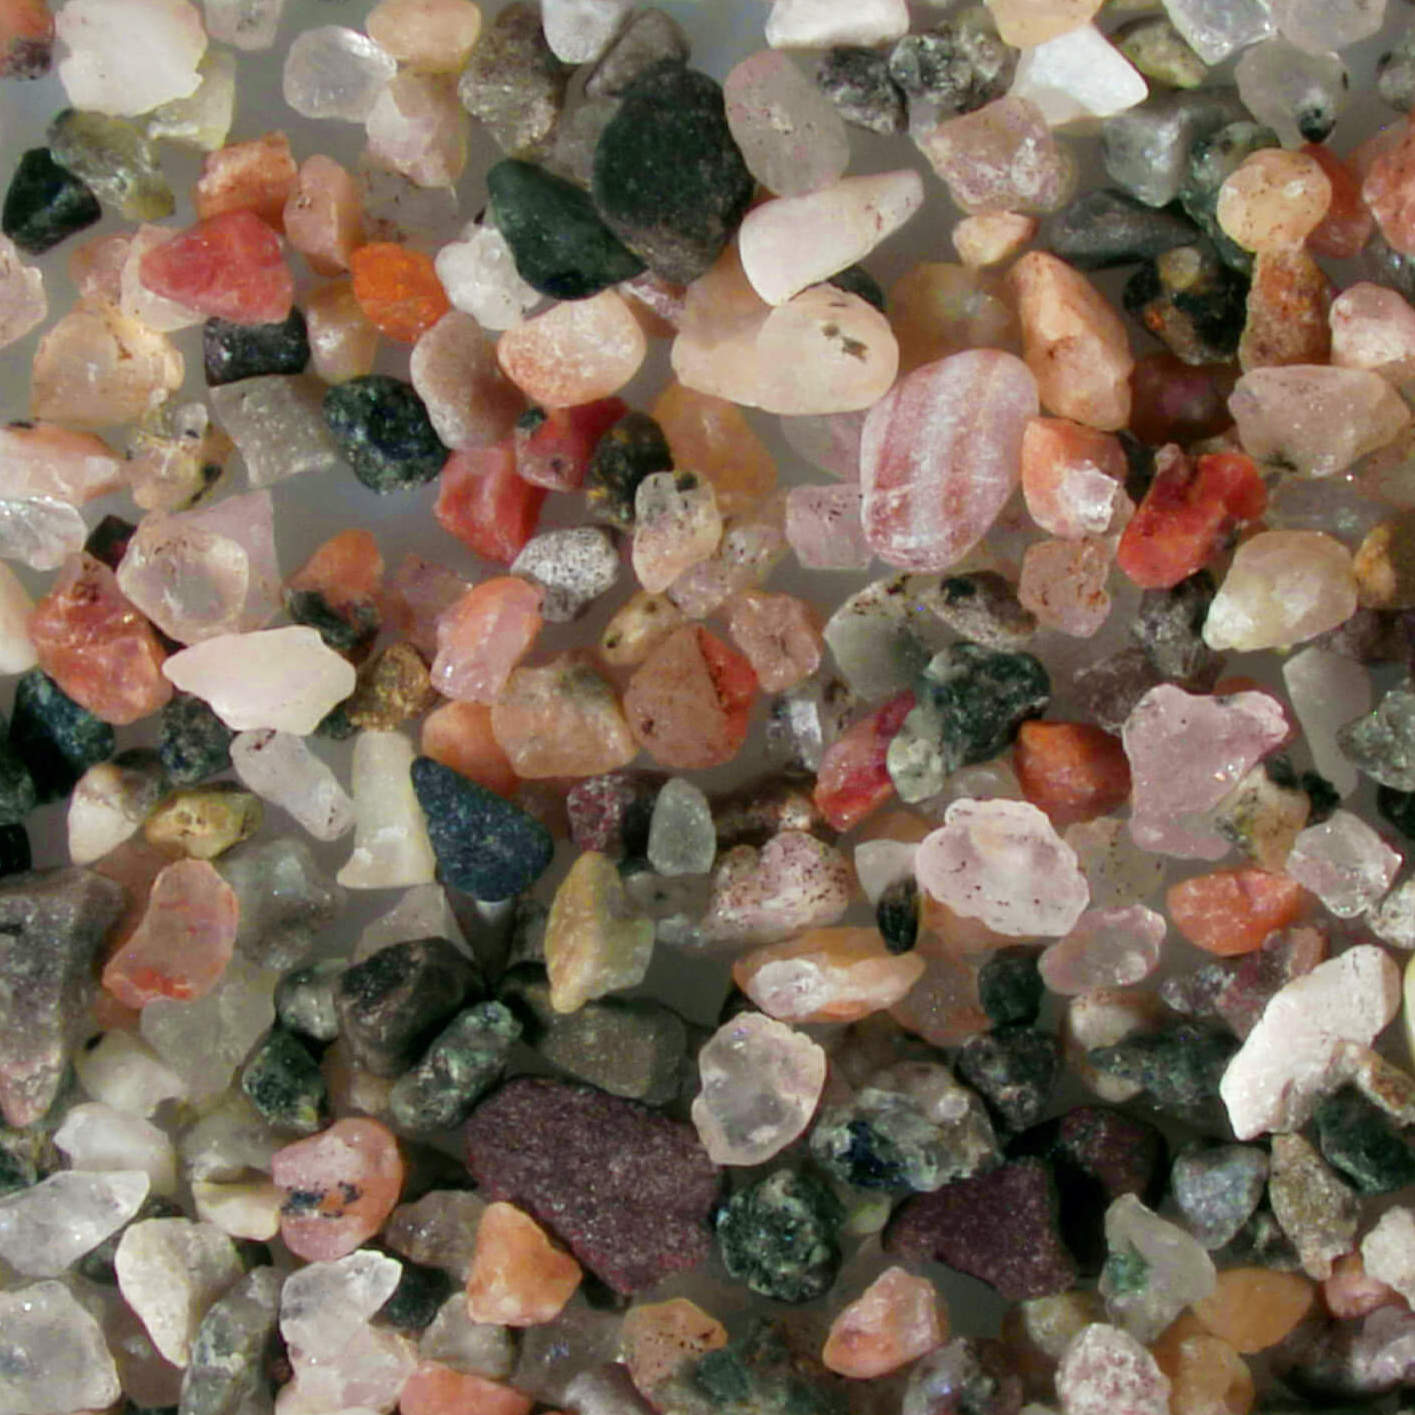 Sally's Cove Newfoundland Sand Grains Magnified Under Microscope Square